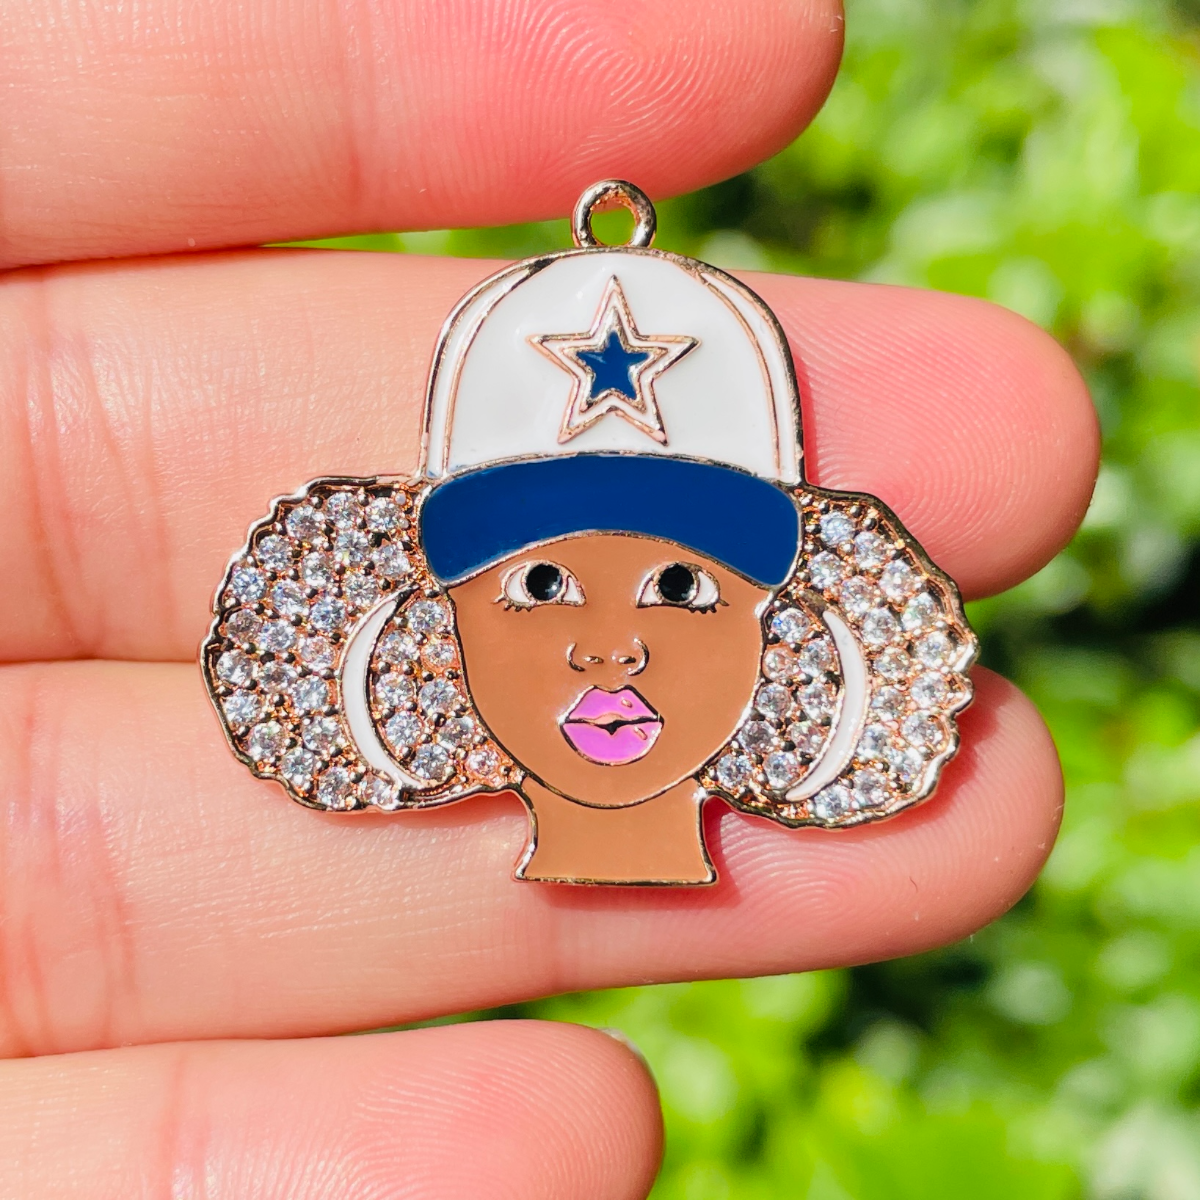 10pcs/lot 32.8*29.5mm CZ Paved Cowboys Black Girl Charms Rose Gold CZ Paved Charms Afro Girl/Queen Charms American Football Sports New Charms Arrivals Charms Beads Beyond